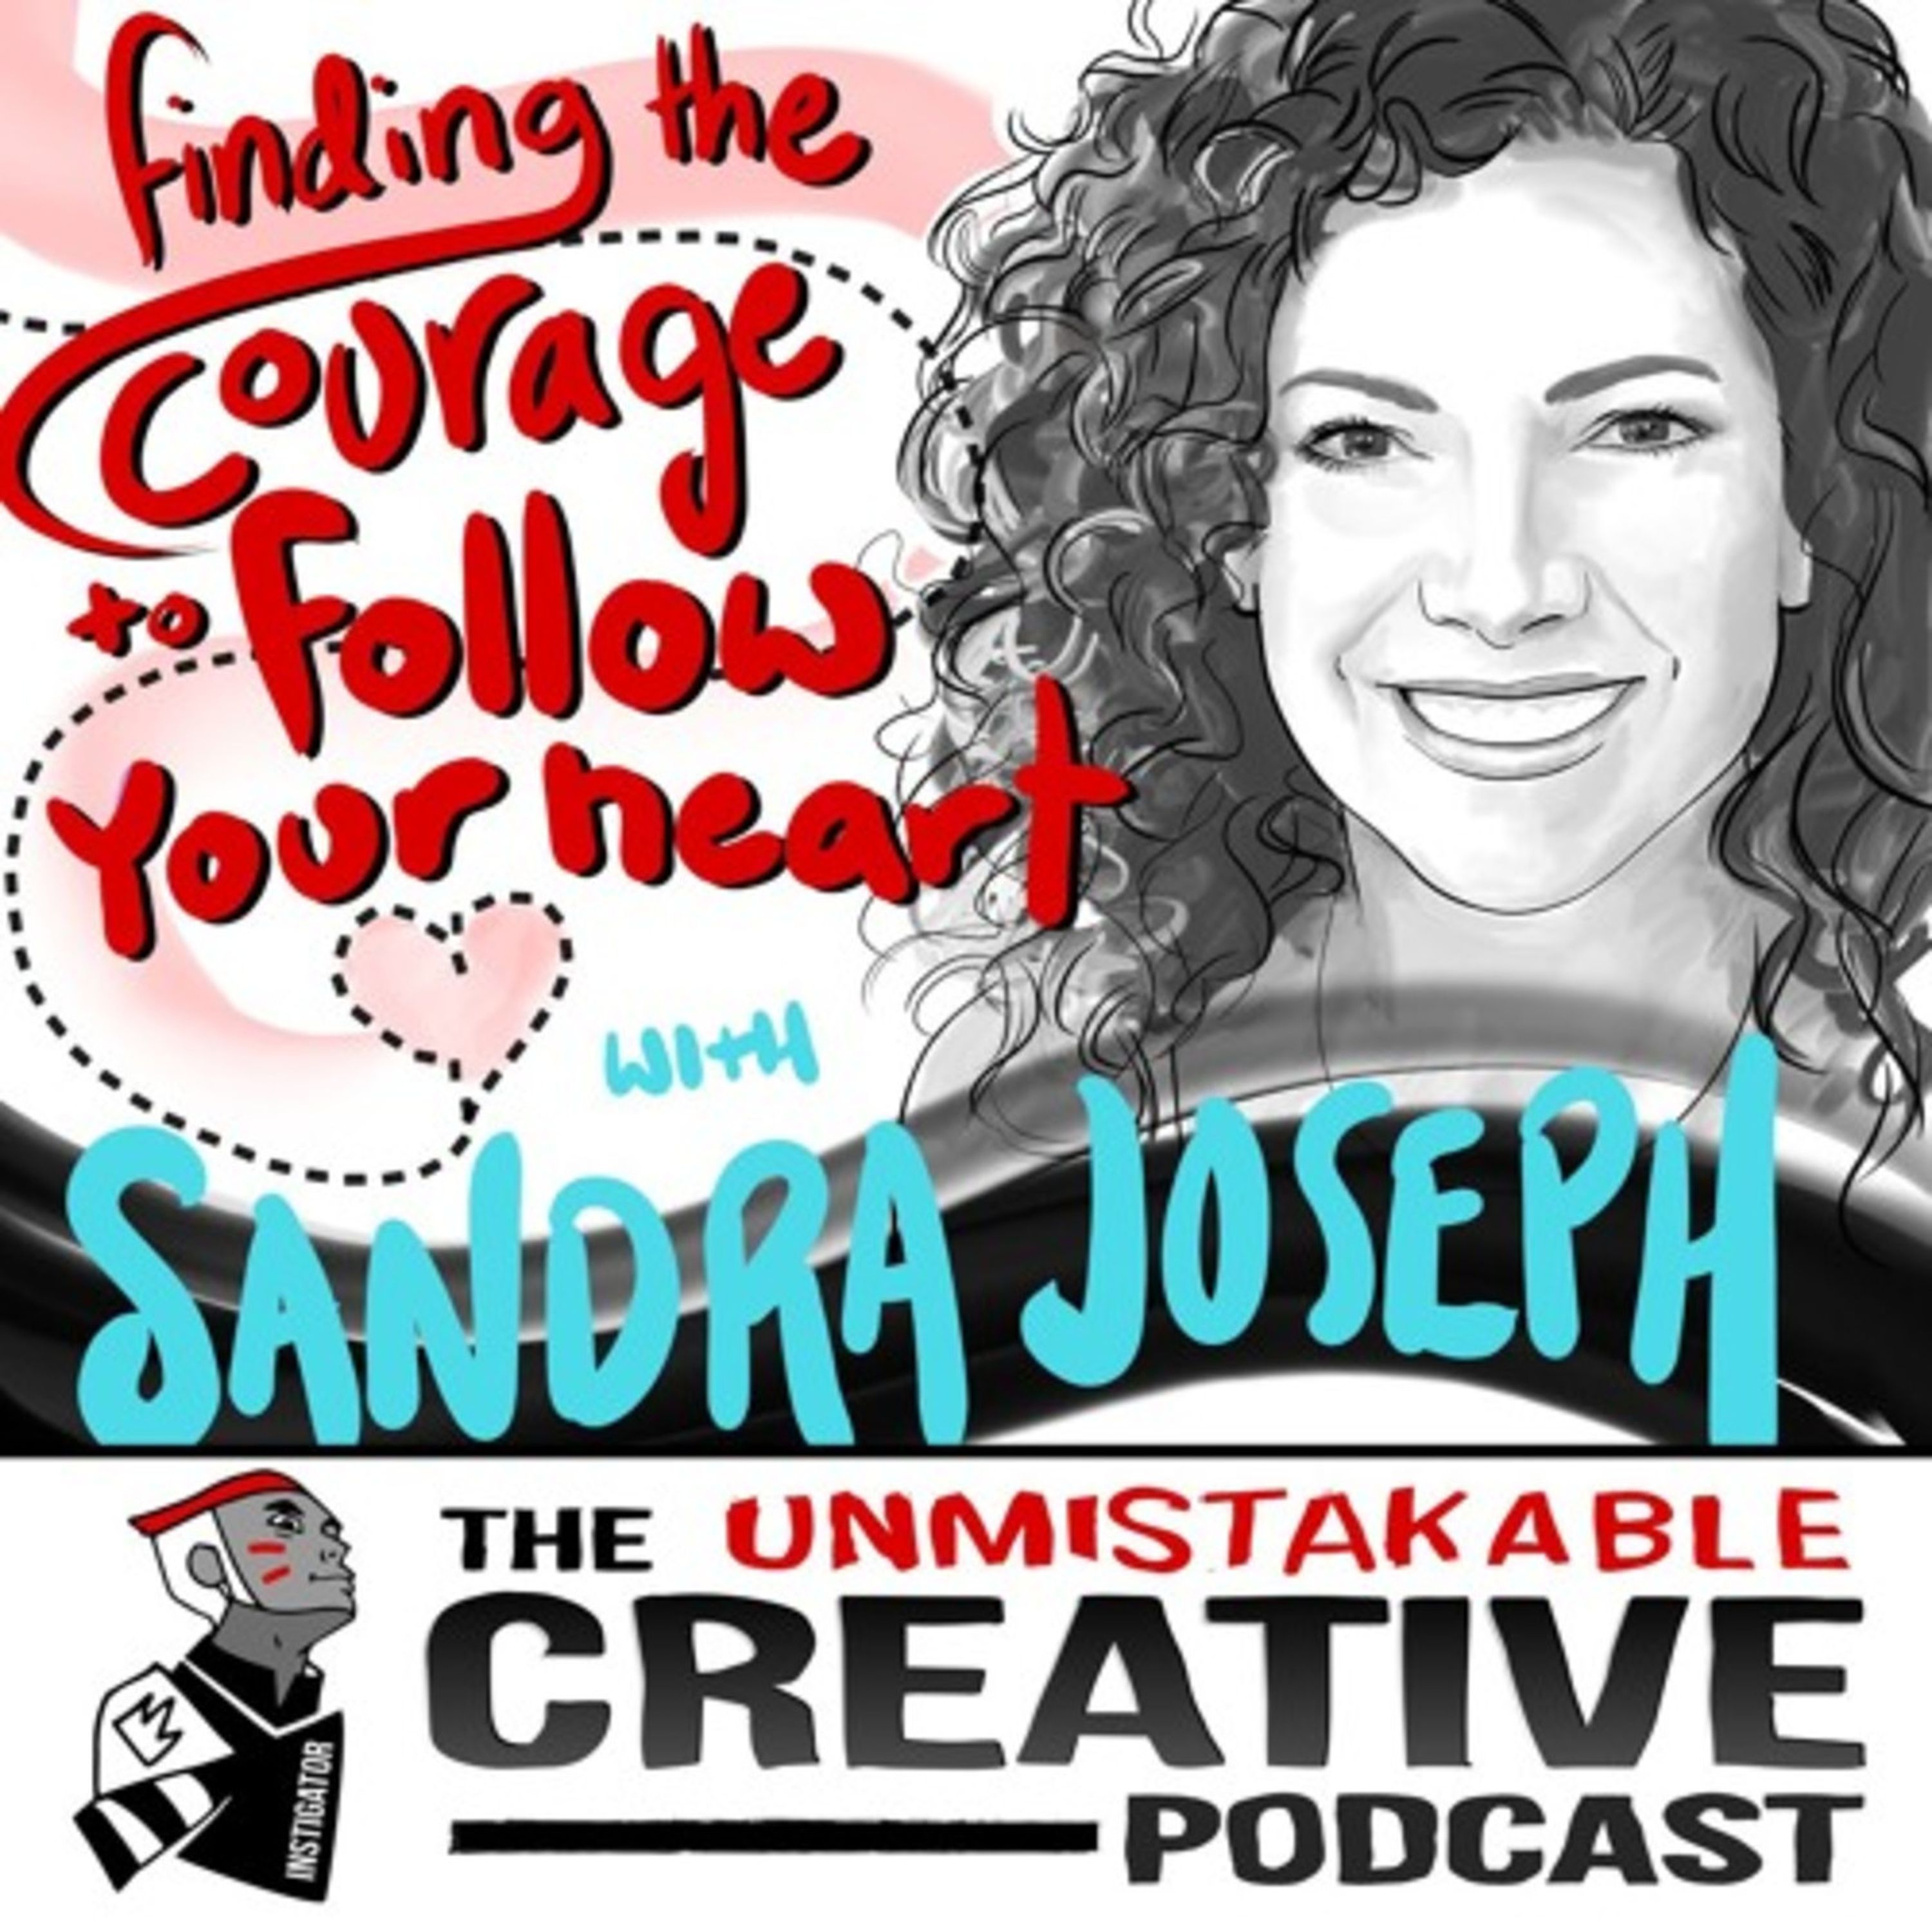 Sandra Joseph: Finding the Courage to Follow Your Heart Image